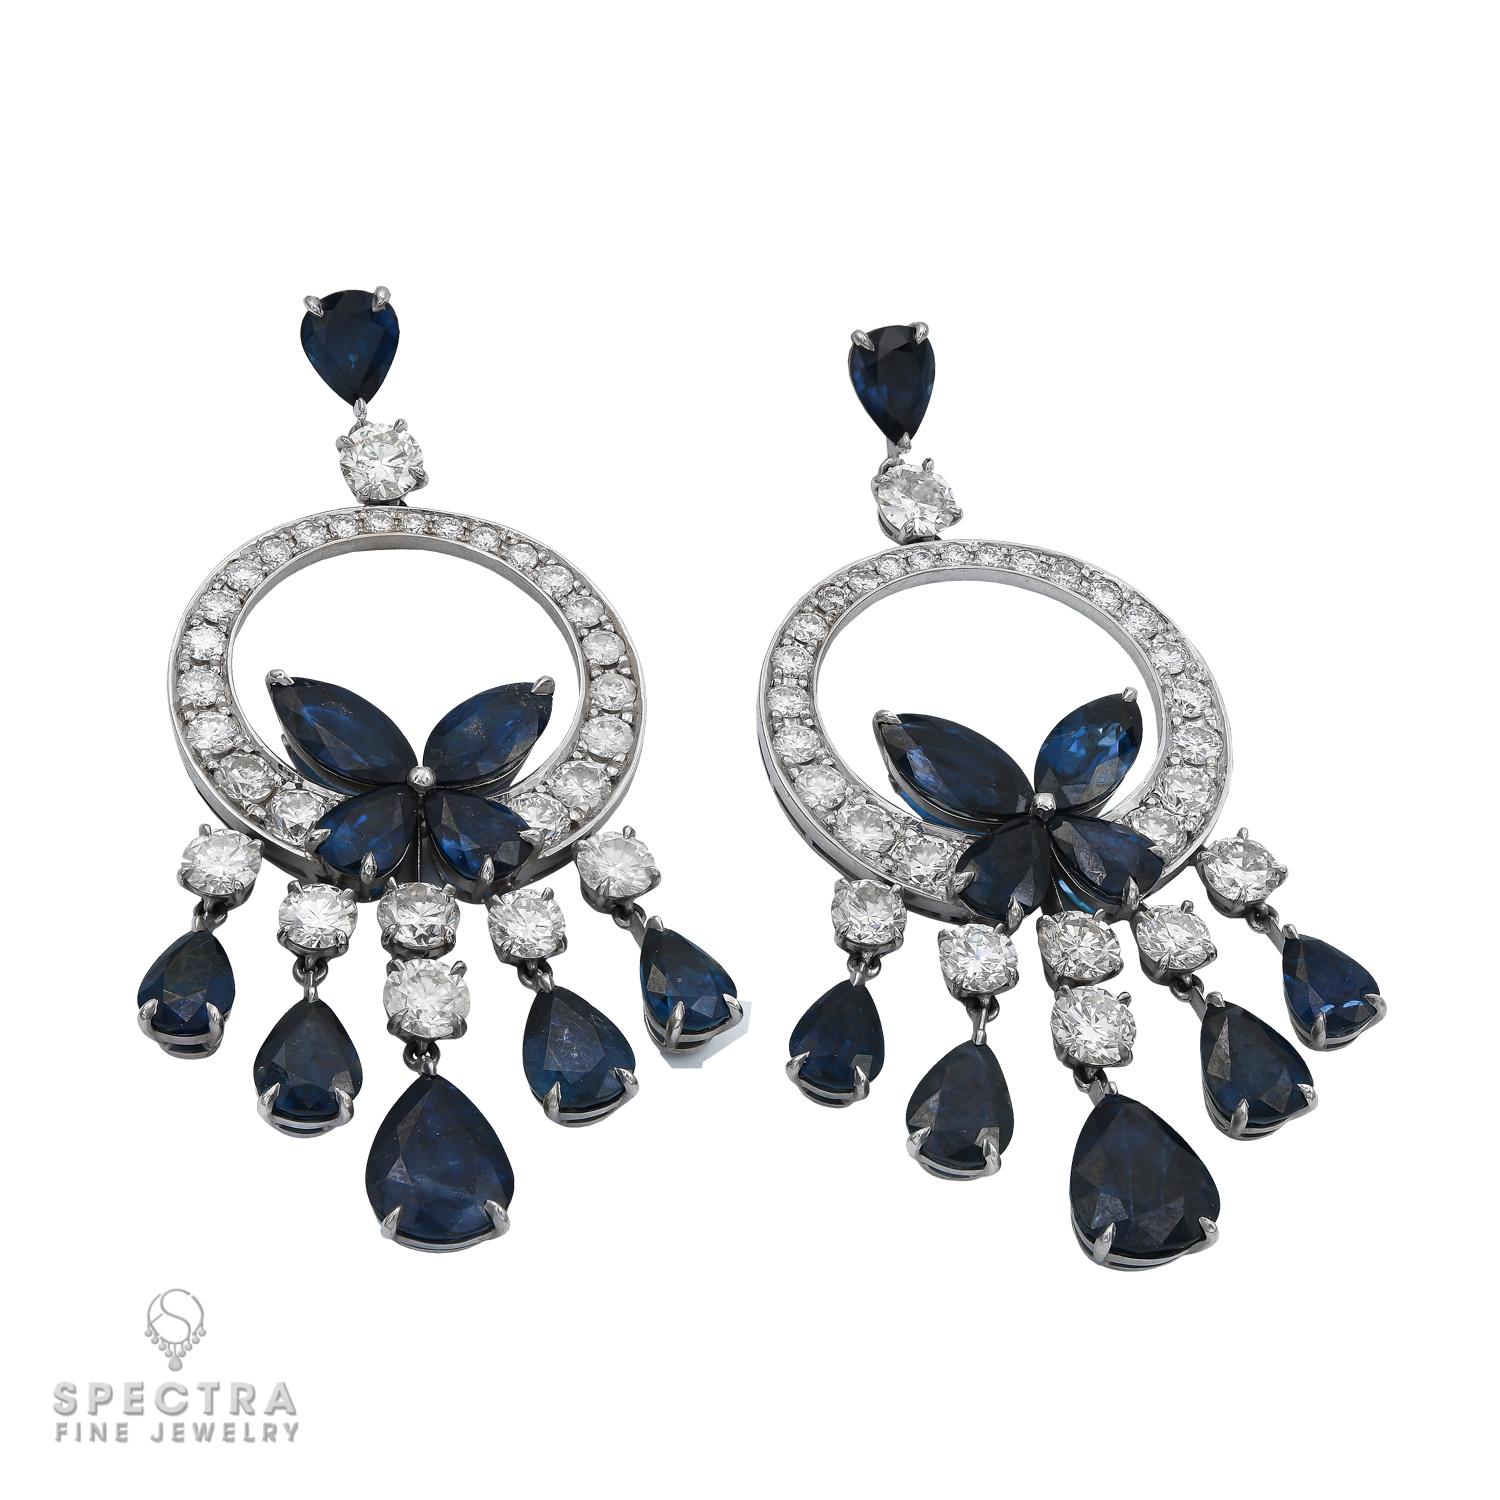 When glancing at these artful chandelier earrings, we are transformed to the Andalusian province of Seville, where flamenco dancers flutter their arms and dress throughout space, similar to a butterfly about to take flight. Aside from the